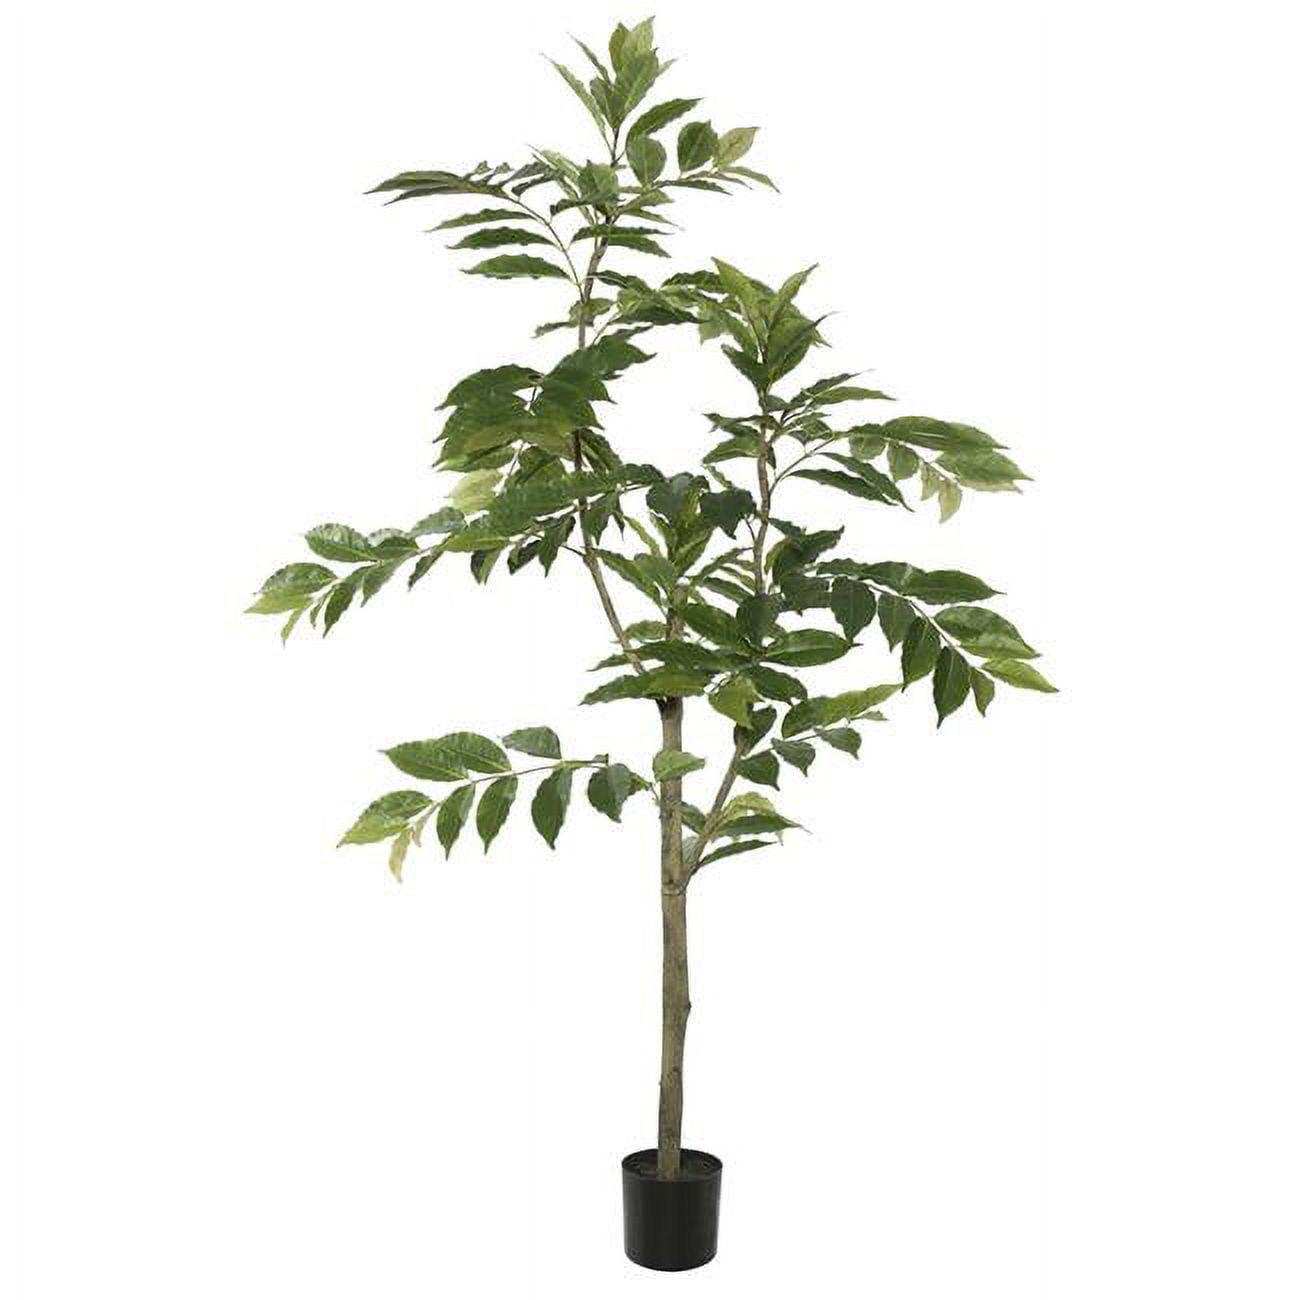 Verdant Haven 6' Potted Artificial Nandina Tree with 284 Leaves